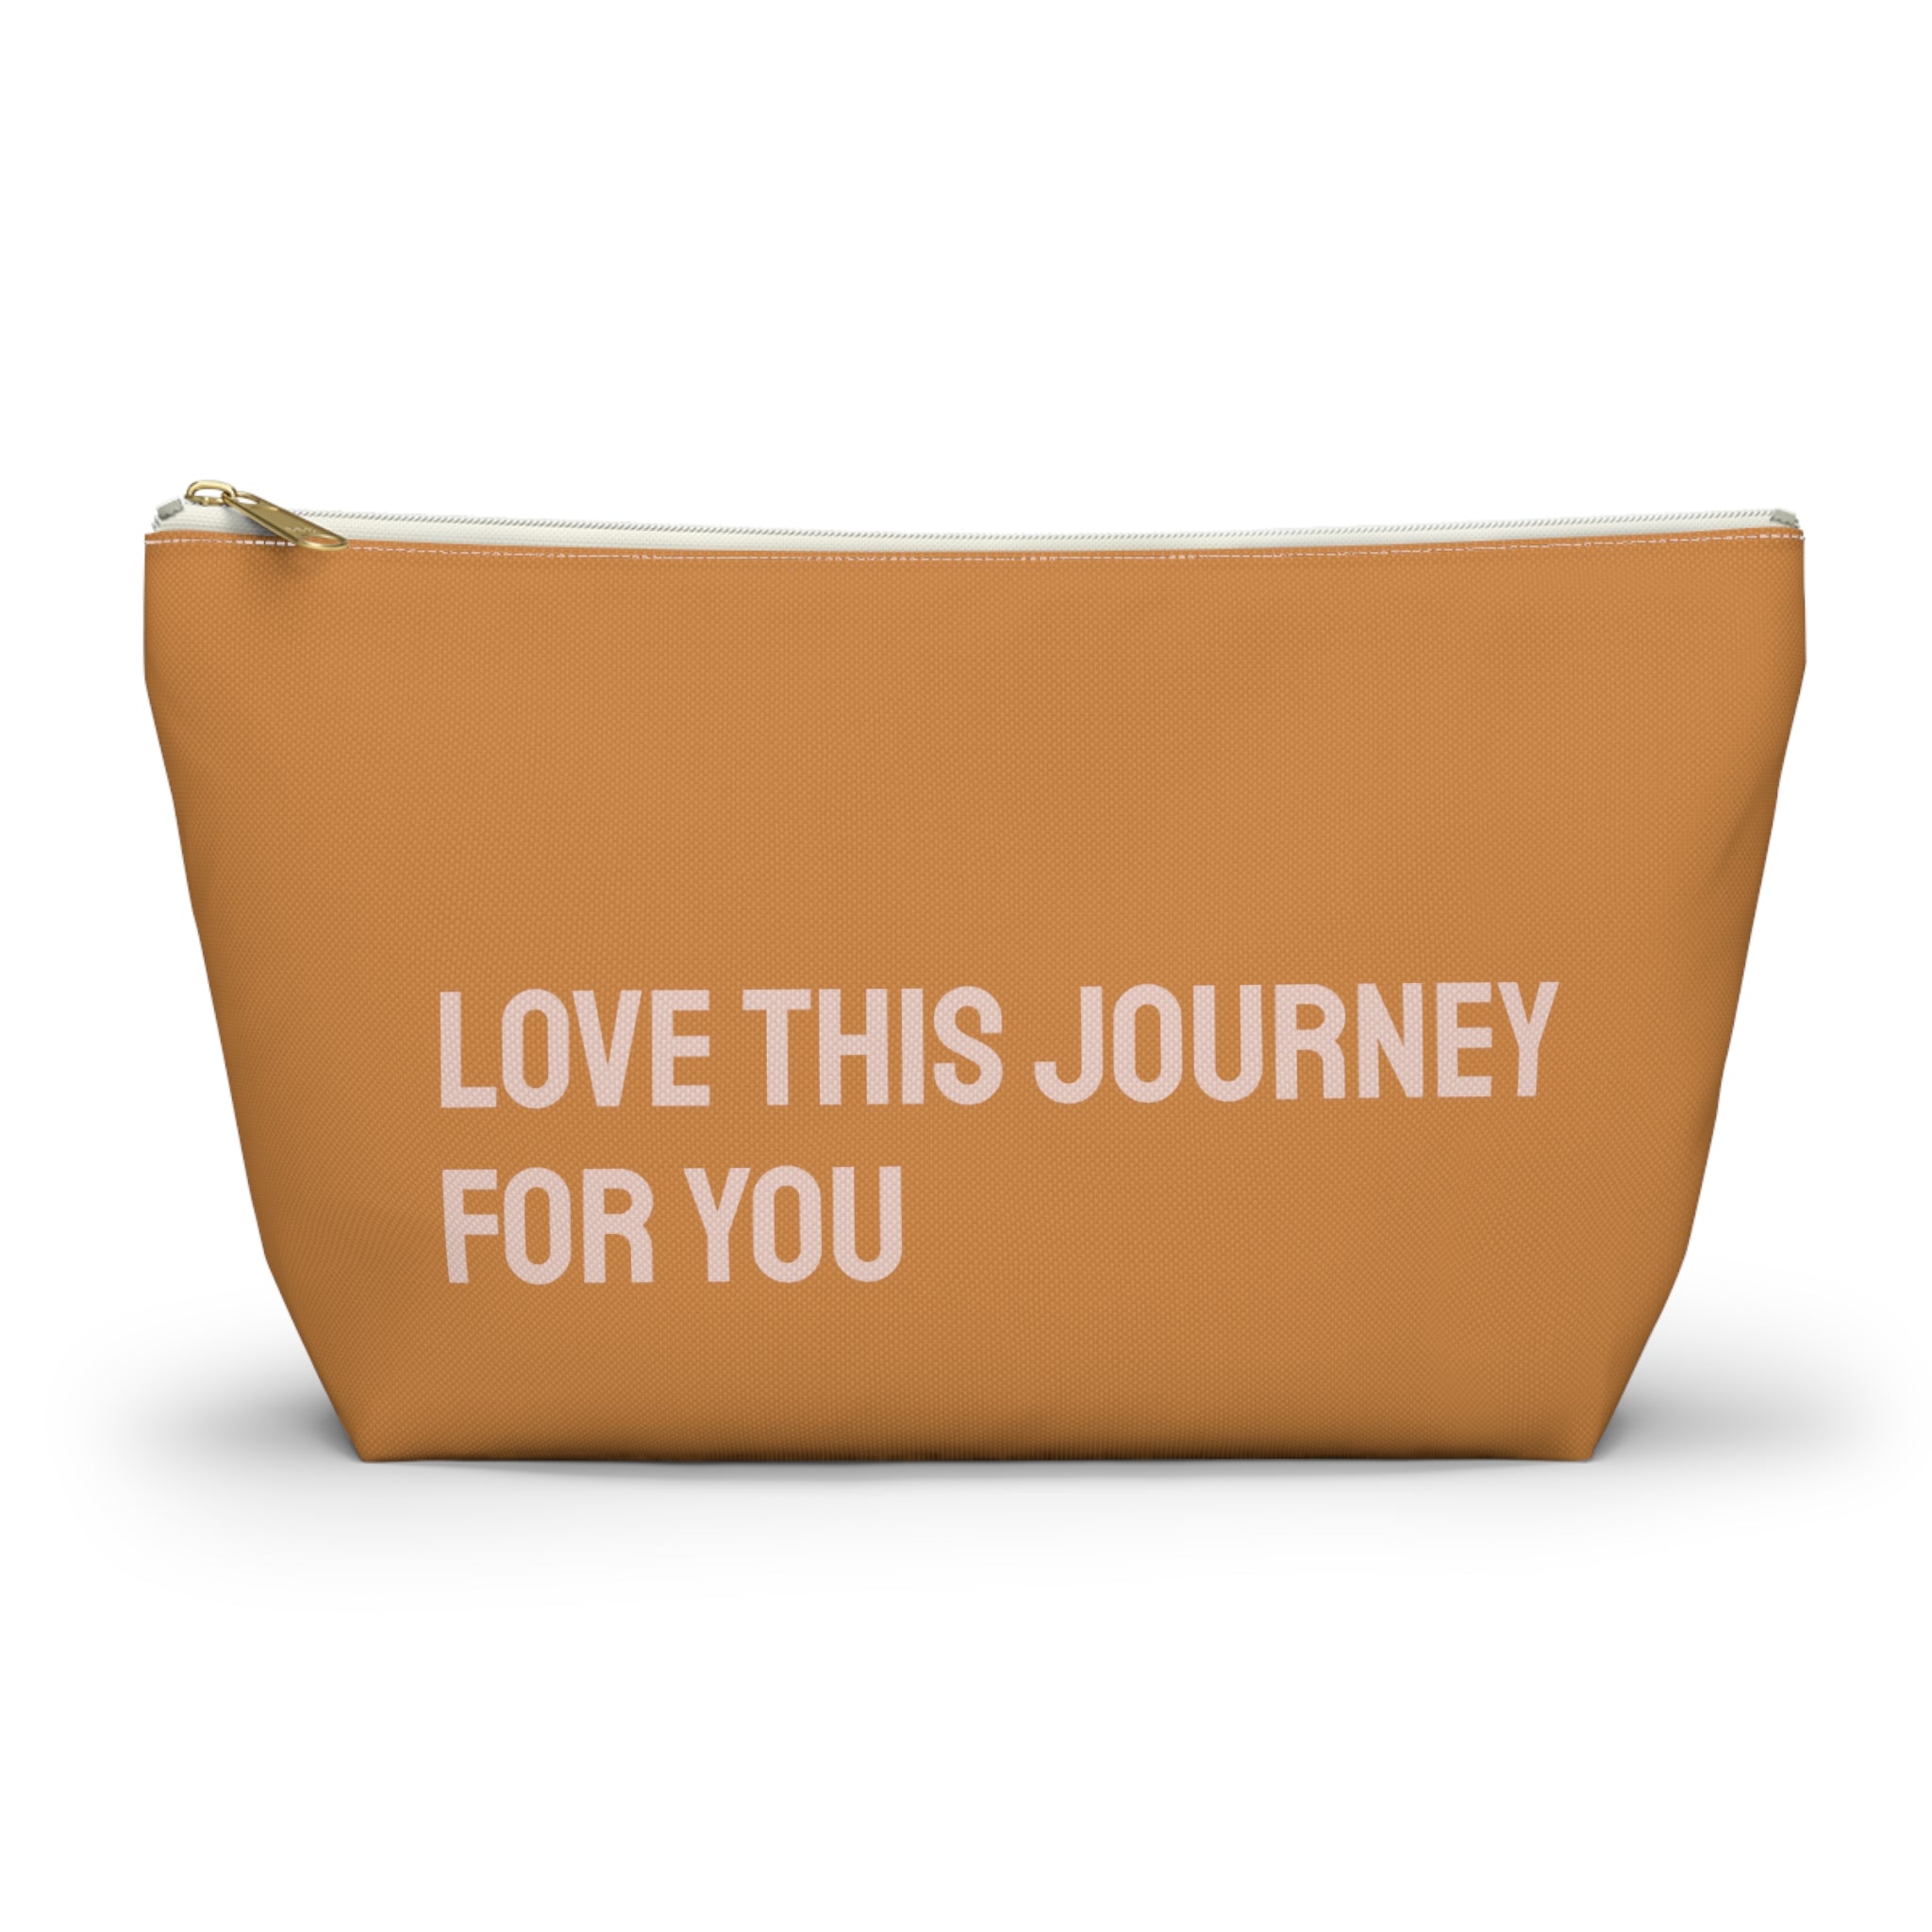 Love this journey for you Pouch (Rust)